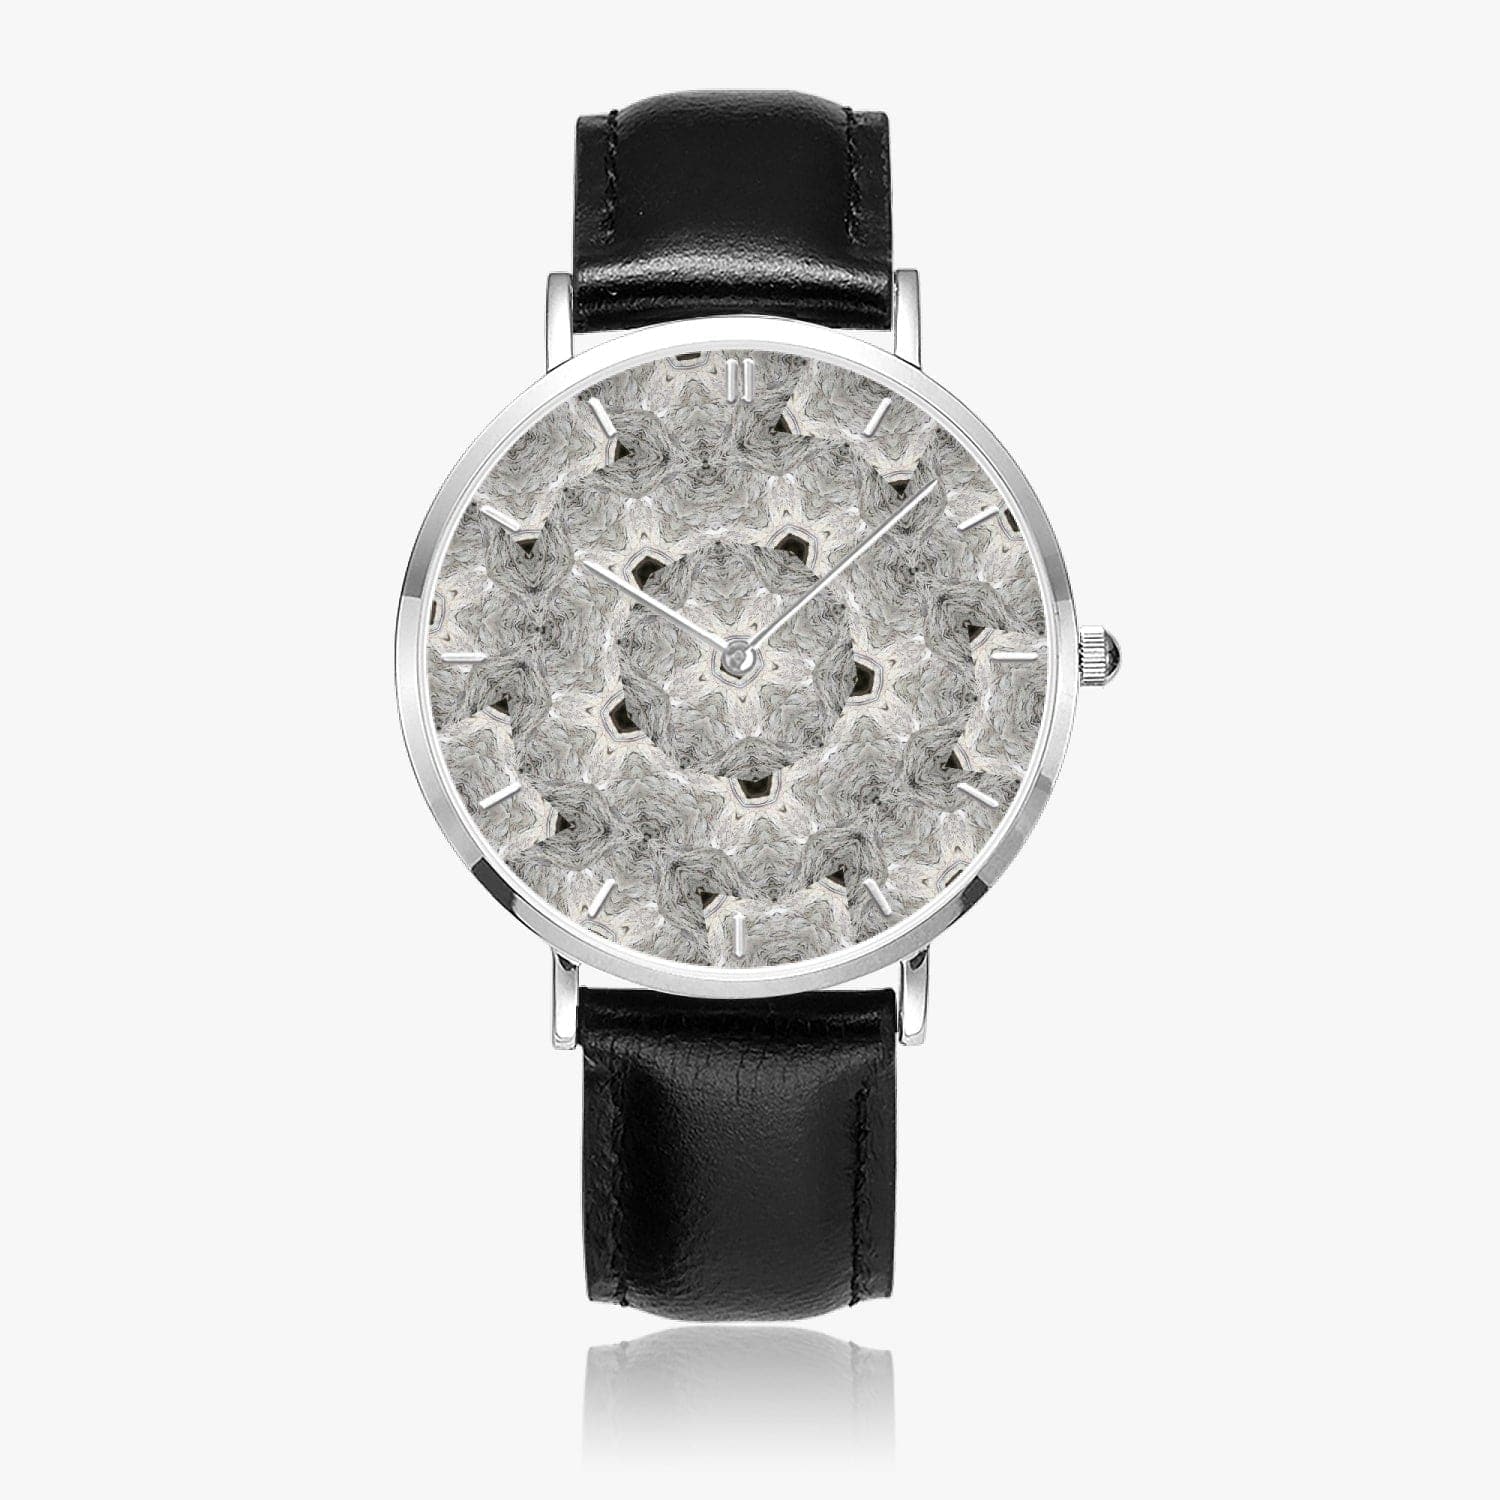 Ruin Staircase mosaïc,  Hot Selling Ultra-Thin Leather Strap Quartz Watch (Silver With Indicators)by Sensus Studio Design